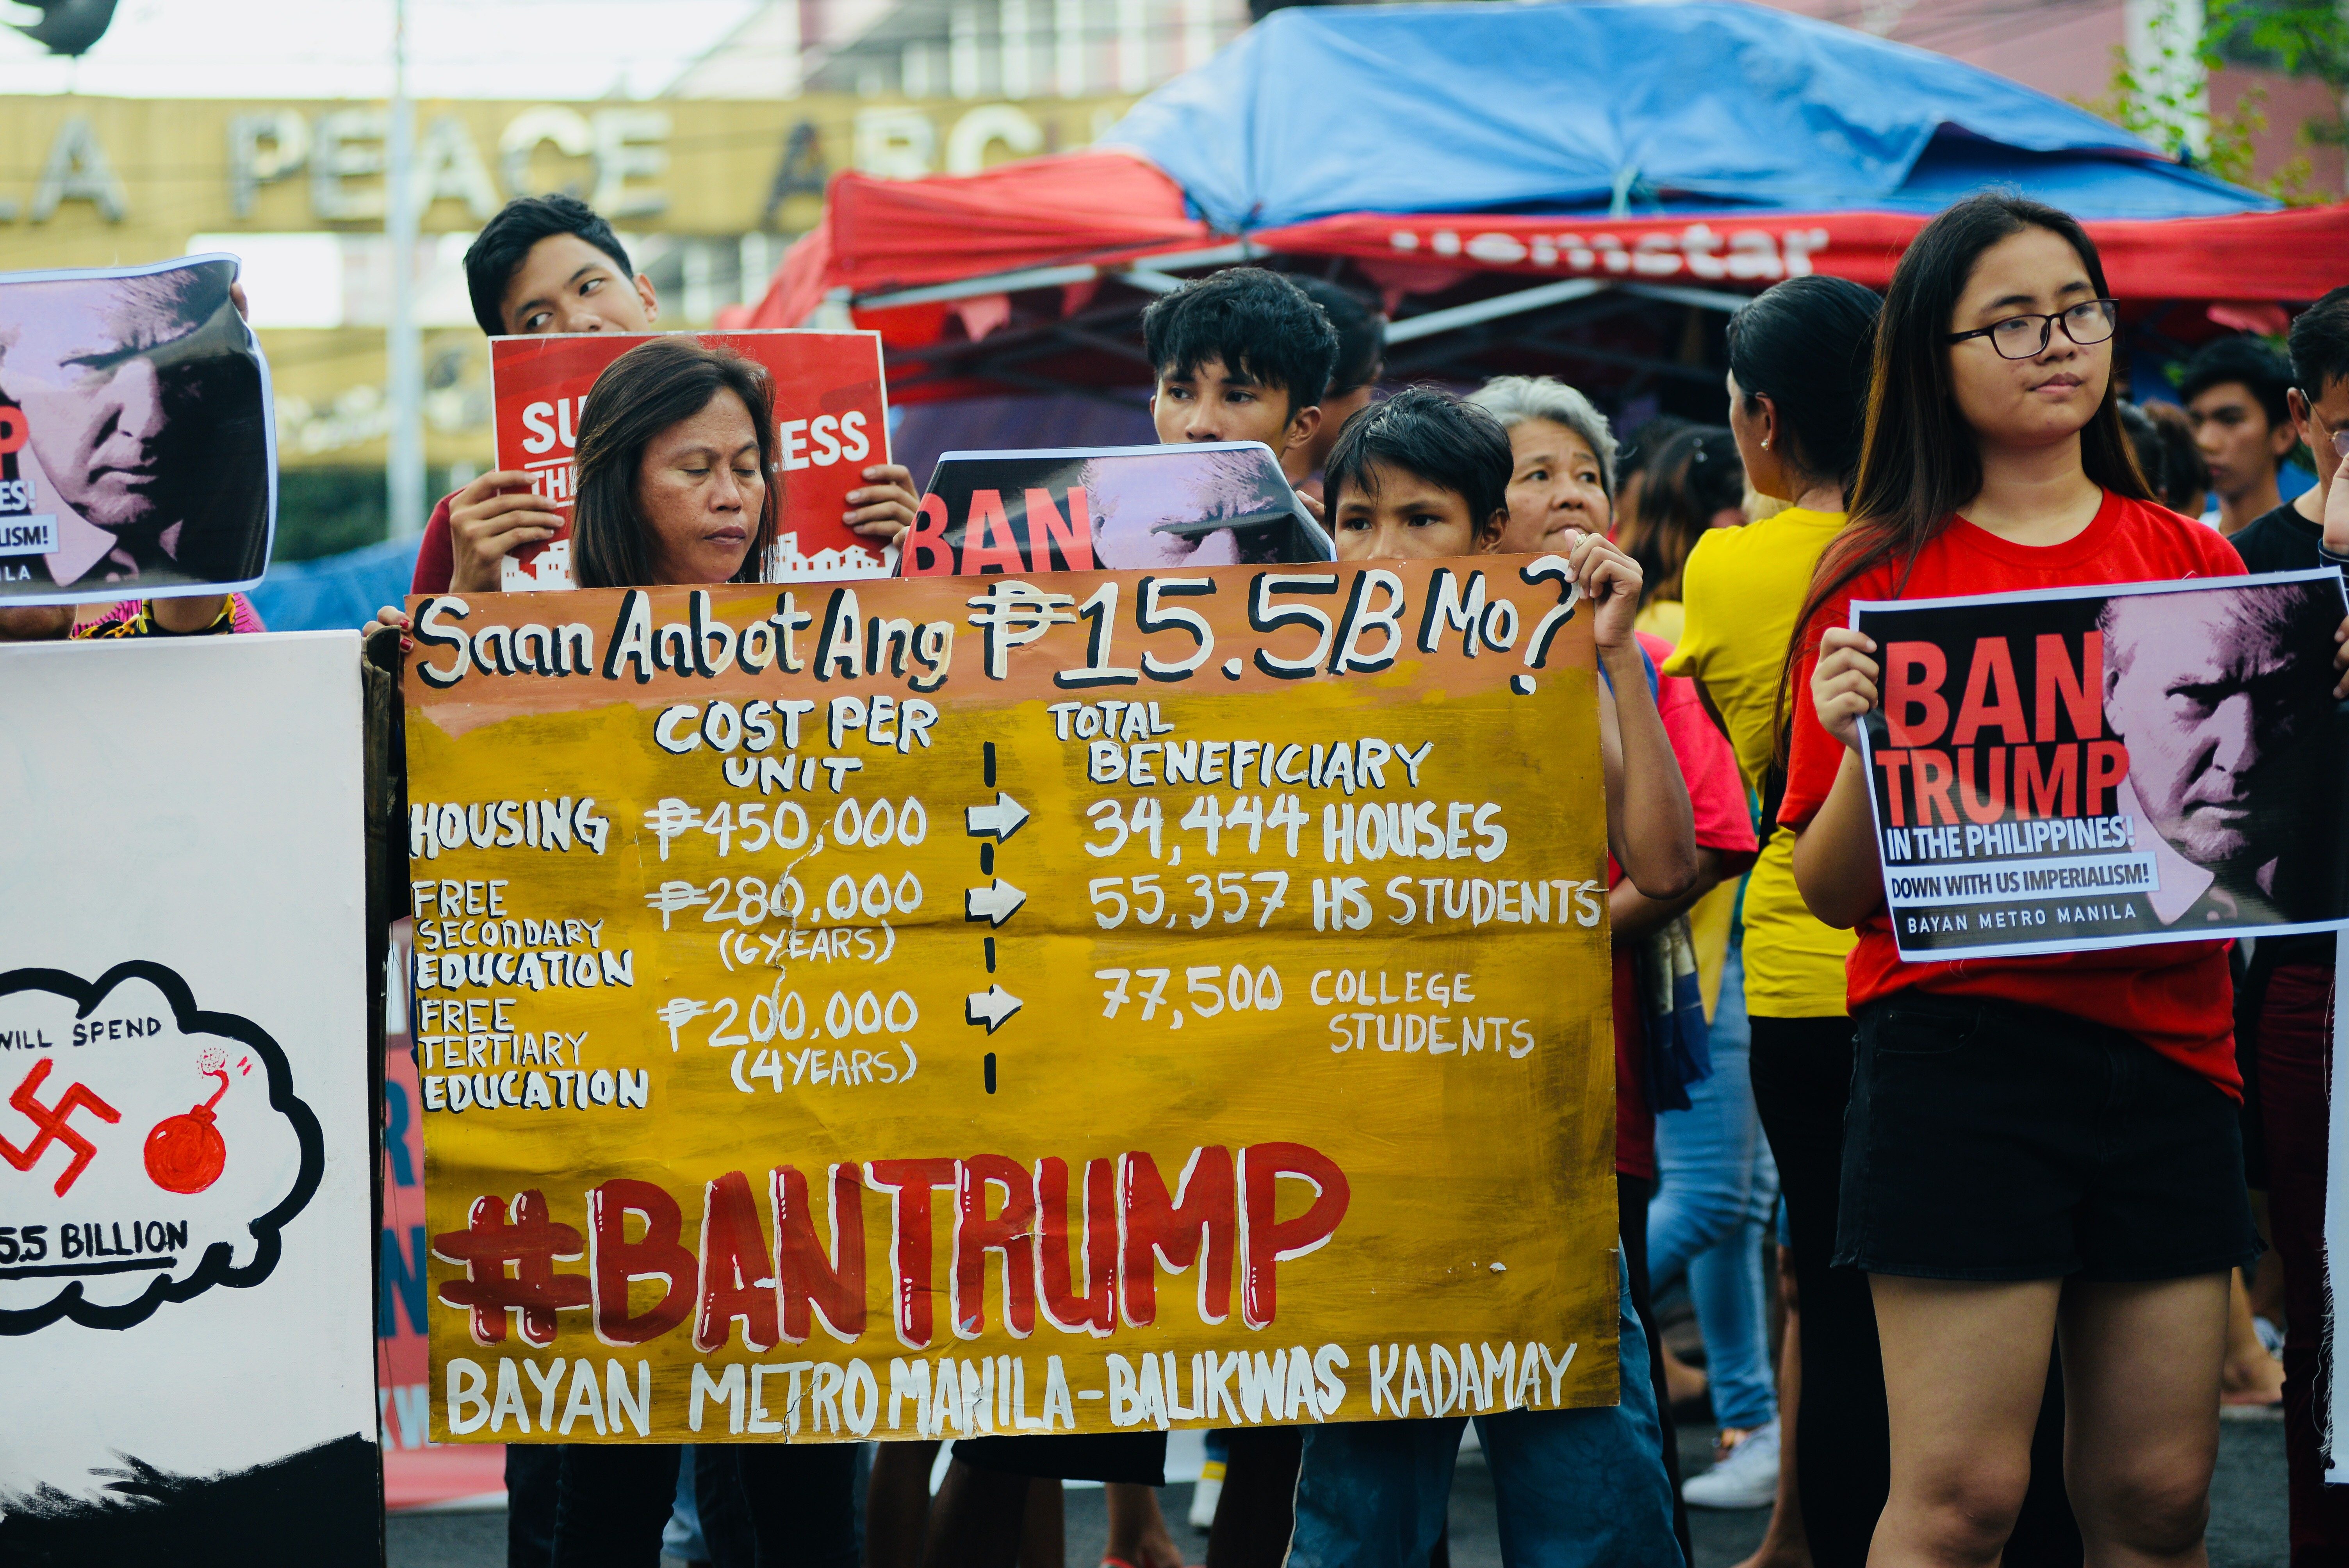 BASIC SOCIAL SERVICES. According to Kadamay, the P15.5 billion budget for the ASEAN summit could fund the creating of 34,444 low-cost housing or send 55,357 high school students and 77,5000 college students to school. Photo by Maria Tan/Rappler  